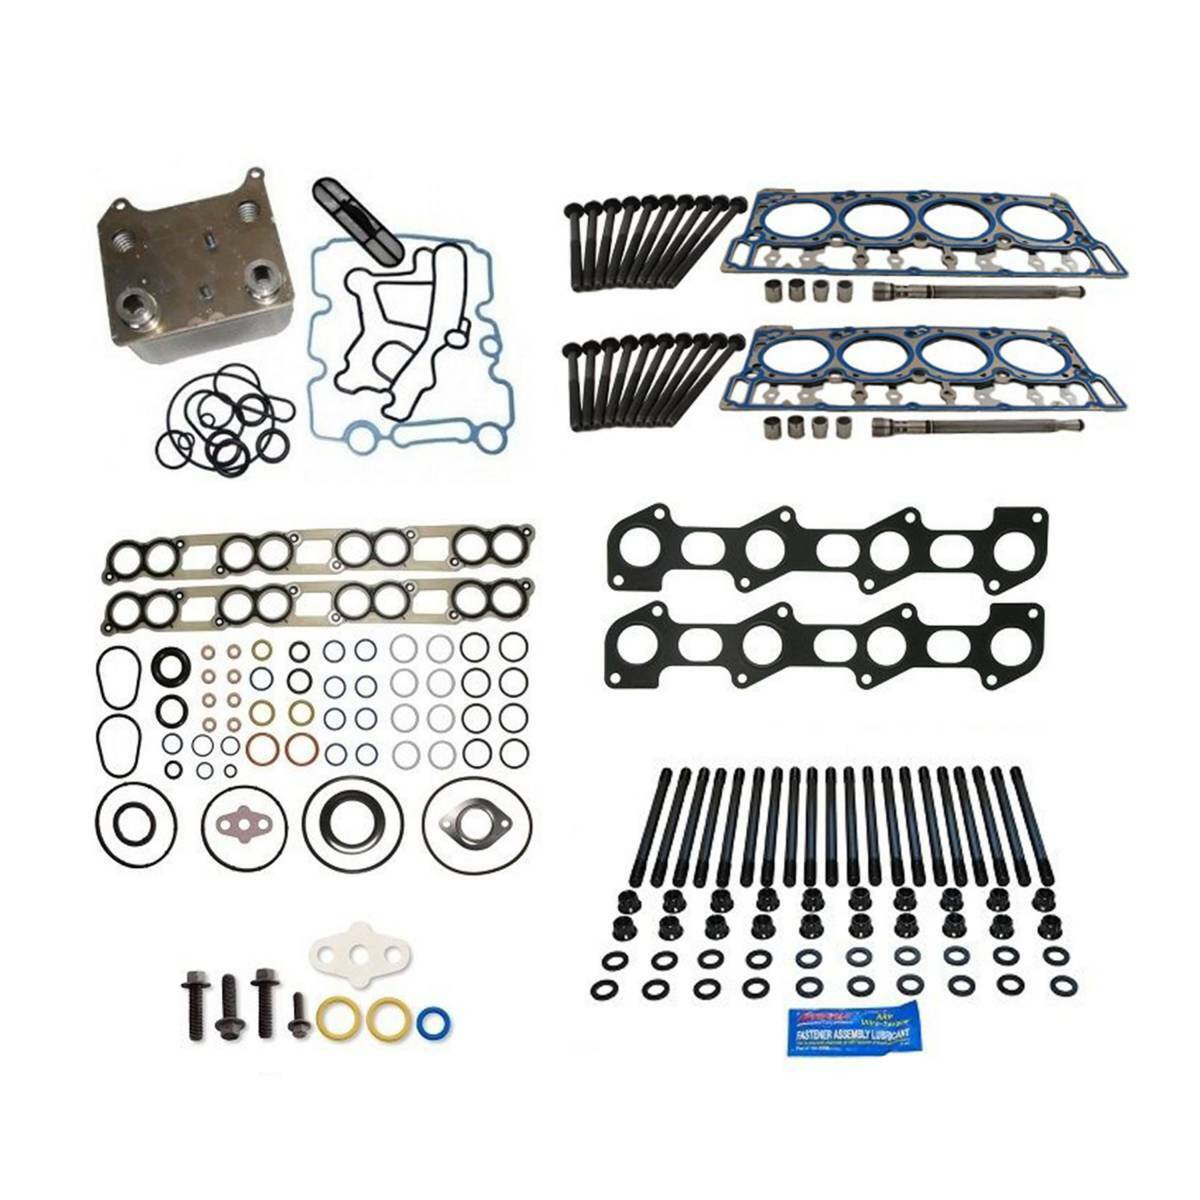 OEM Head Gasket Oil Coolers Replacement ARP Stud Kit For Ford 6.0L Powerstroke 